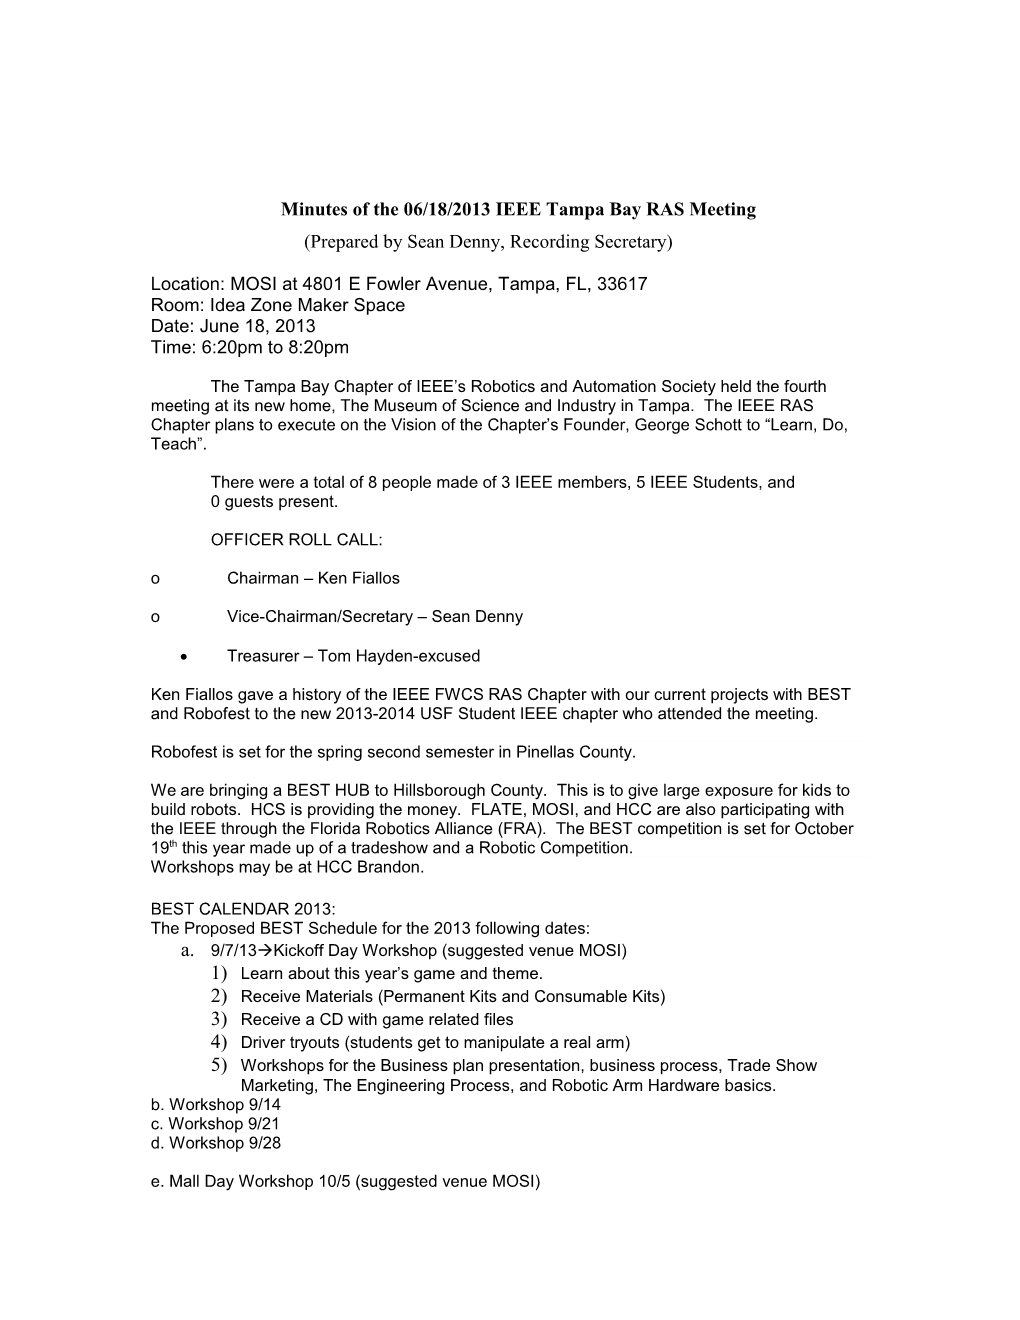 Minutes of the 06/18/2013 IEEE Tampa Bay RAS Meeting